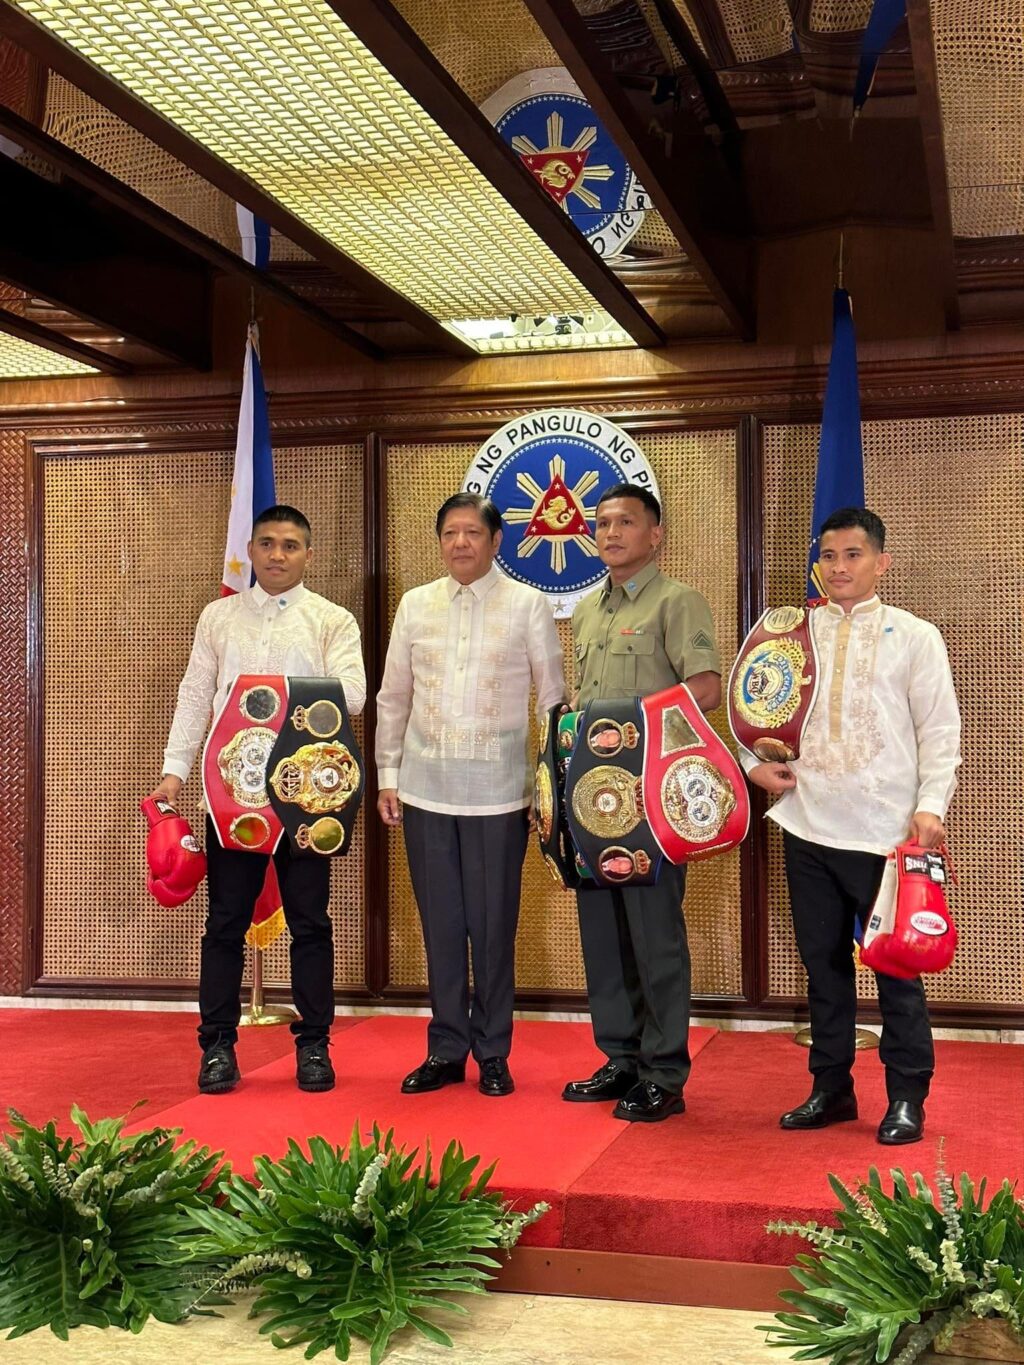 New Filipino boxing champions pay a courtesy call to President Ferdinand Marcos Jr. (second from left) at the Malacañang Palace. They are Marlon Tapales (from left) Charly Suarez, and Melvin Jerusalem.